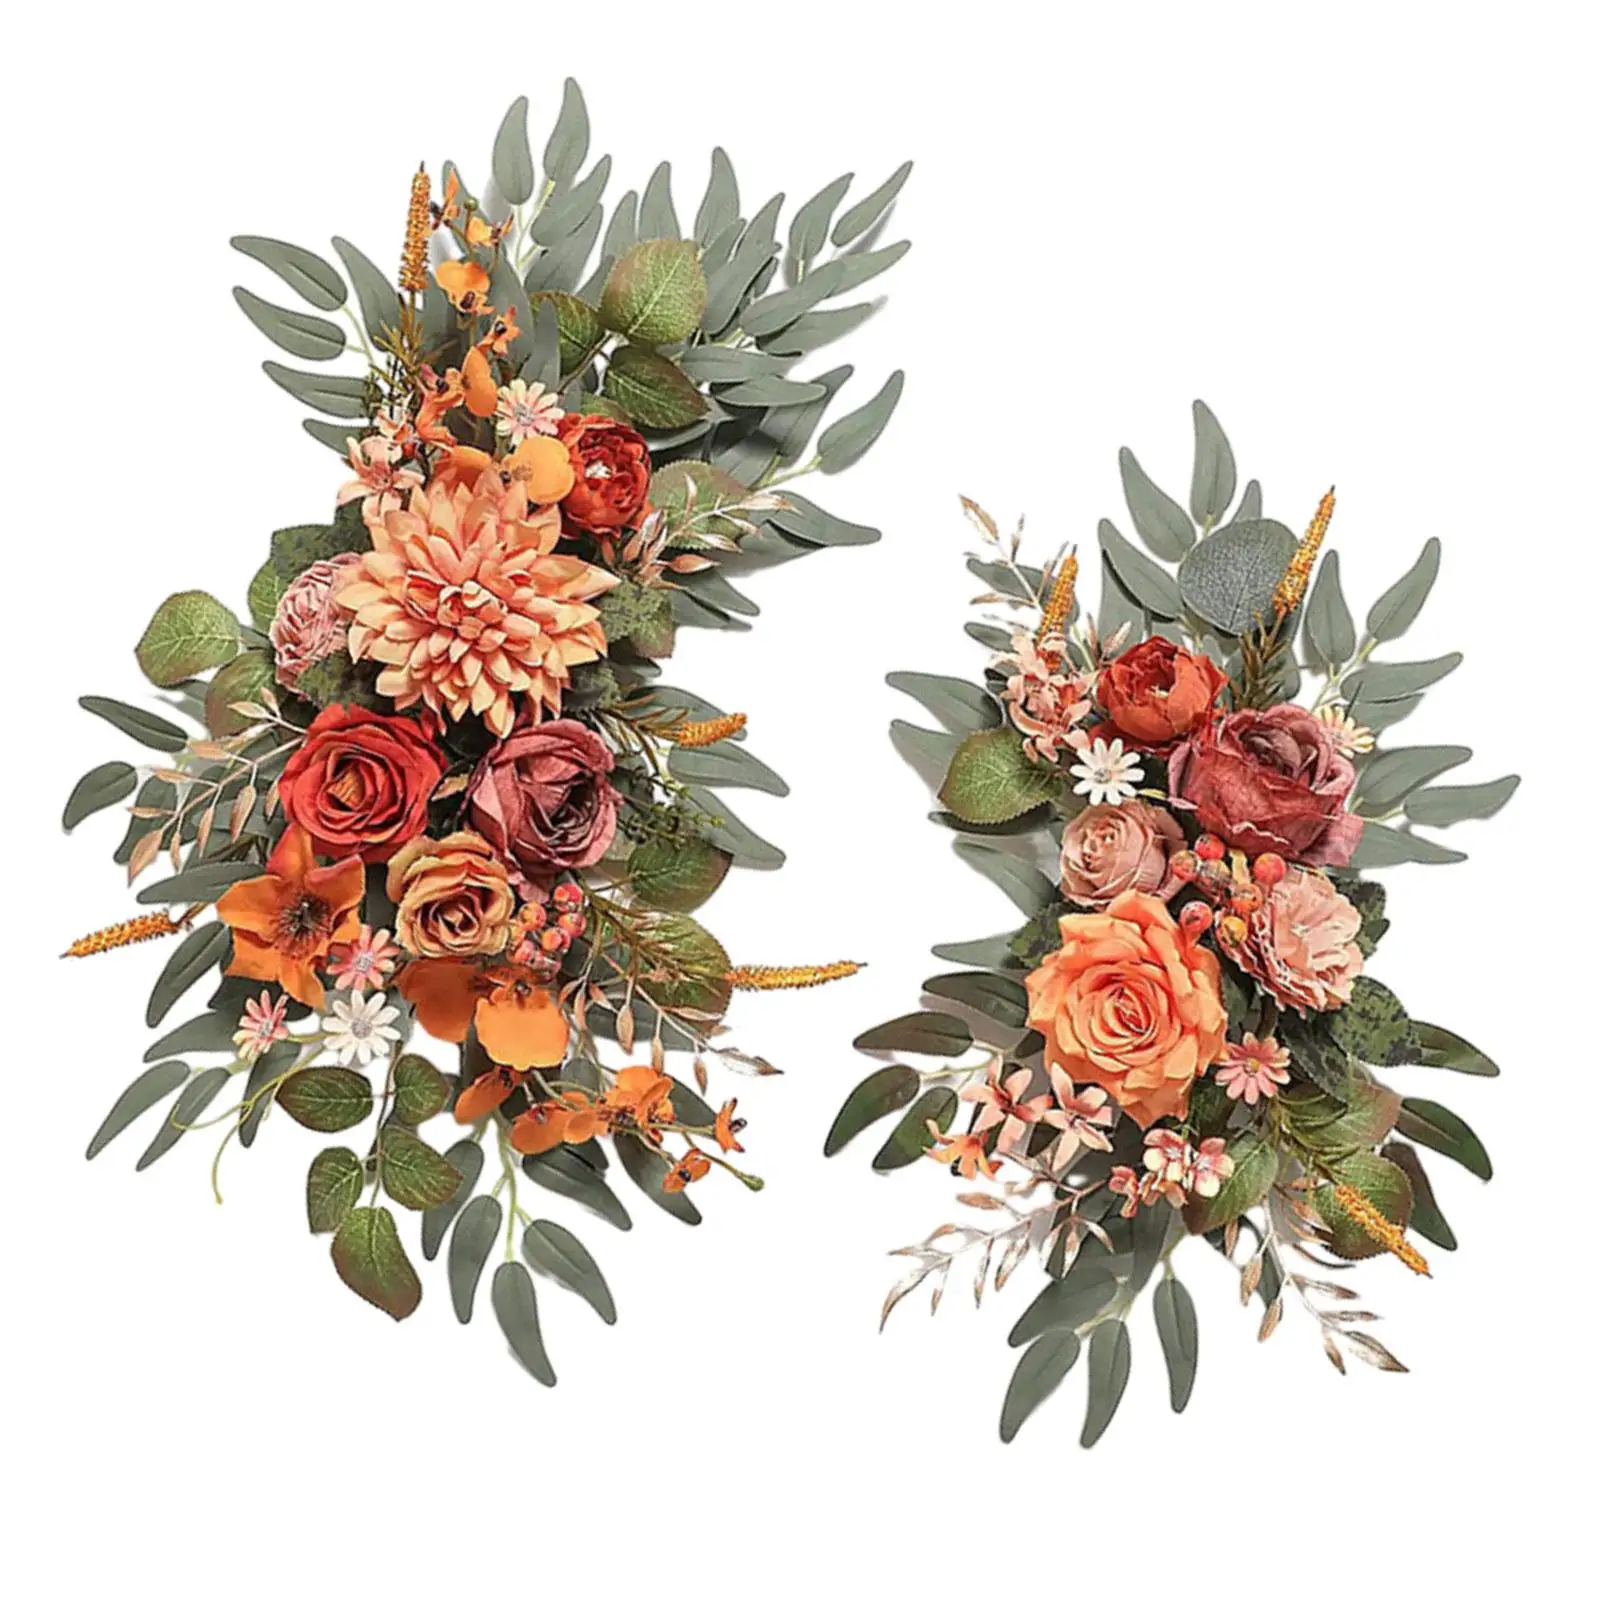 2x Wedding Arch Wreath Decorative Floral Swag Backdrop Artificial Flower Swag for Wedding Front Door Ornament Decoration Wall